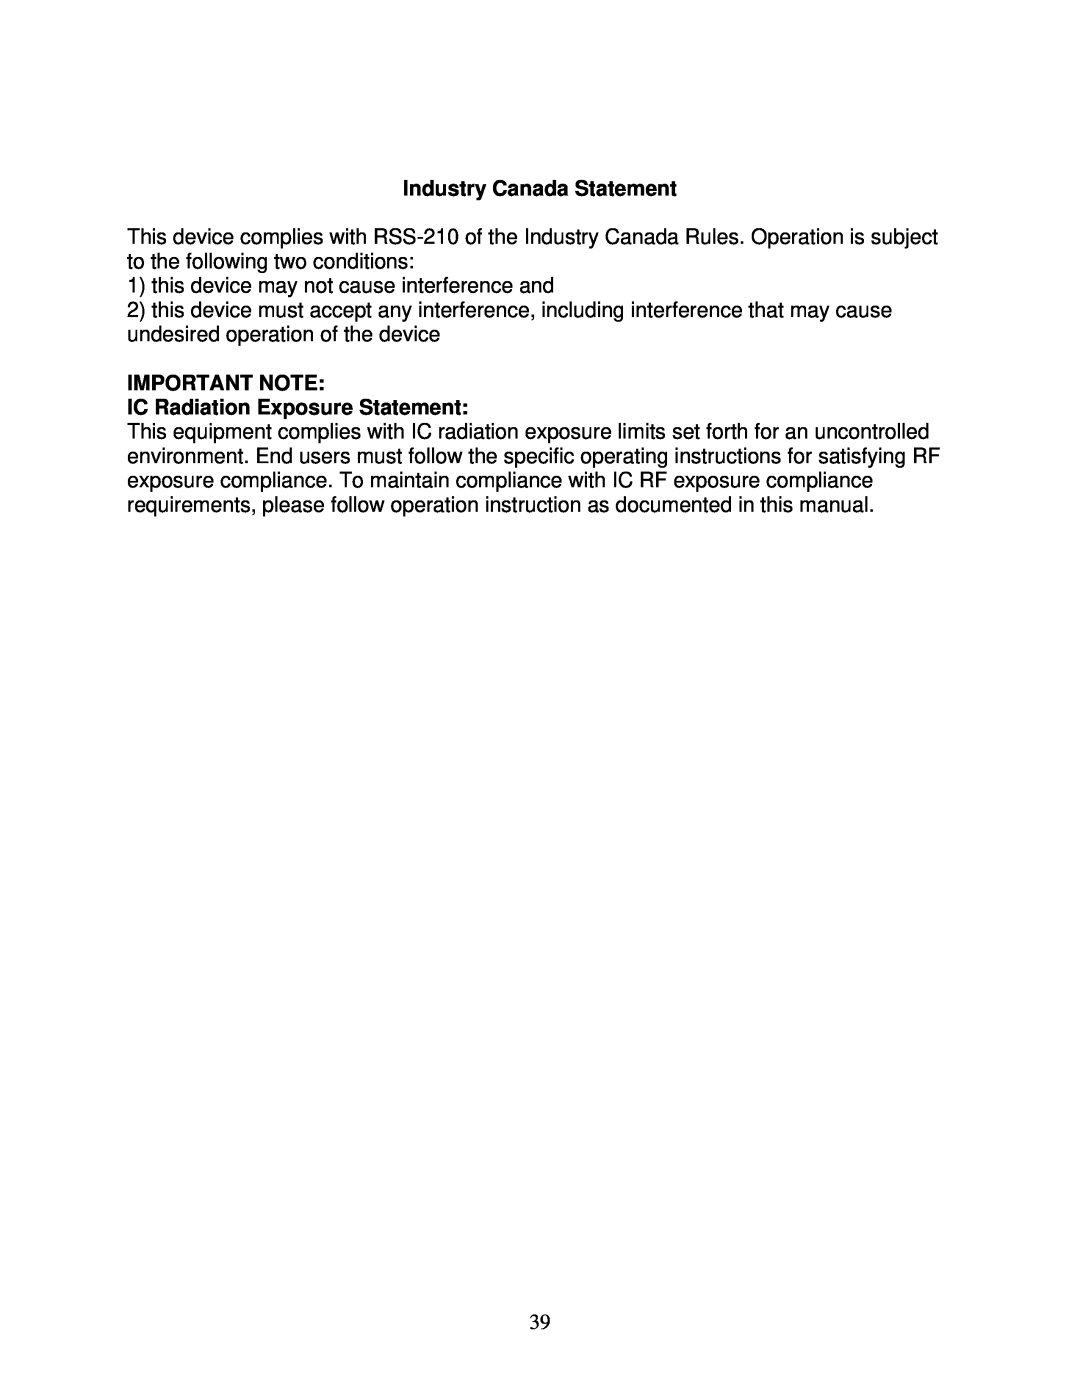 Airlink101 AWLL6090 user manual Industry Canada Statement, IMPORTANT NOTE IC Radiation Exposure Statement 